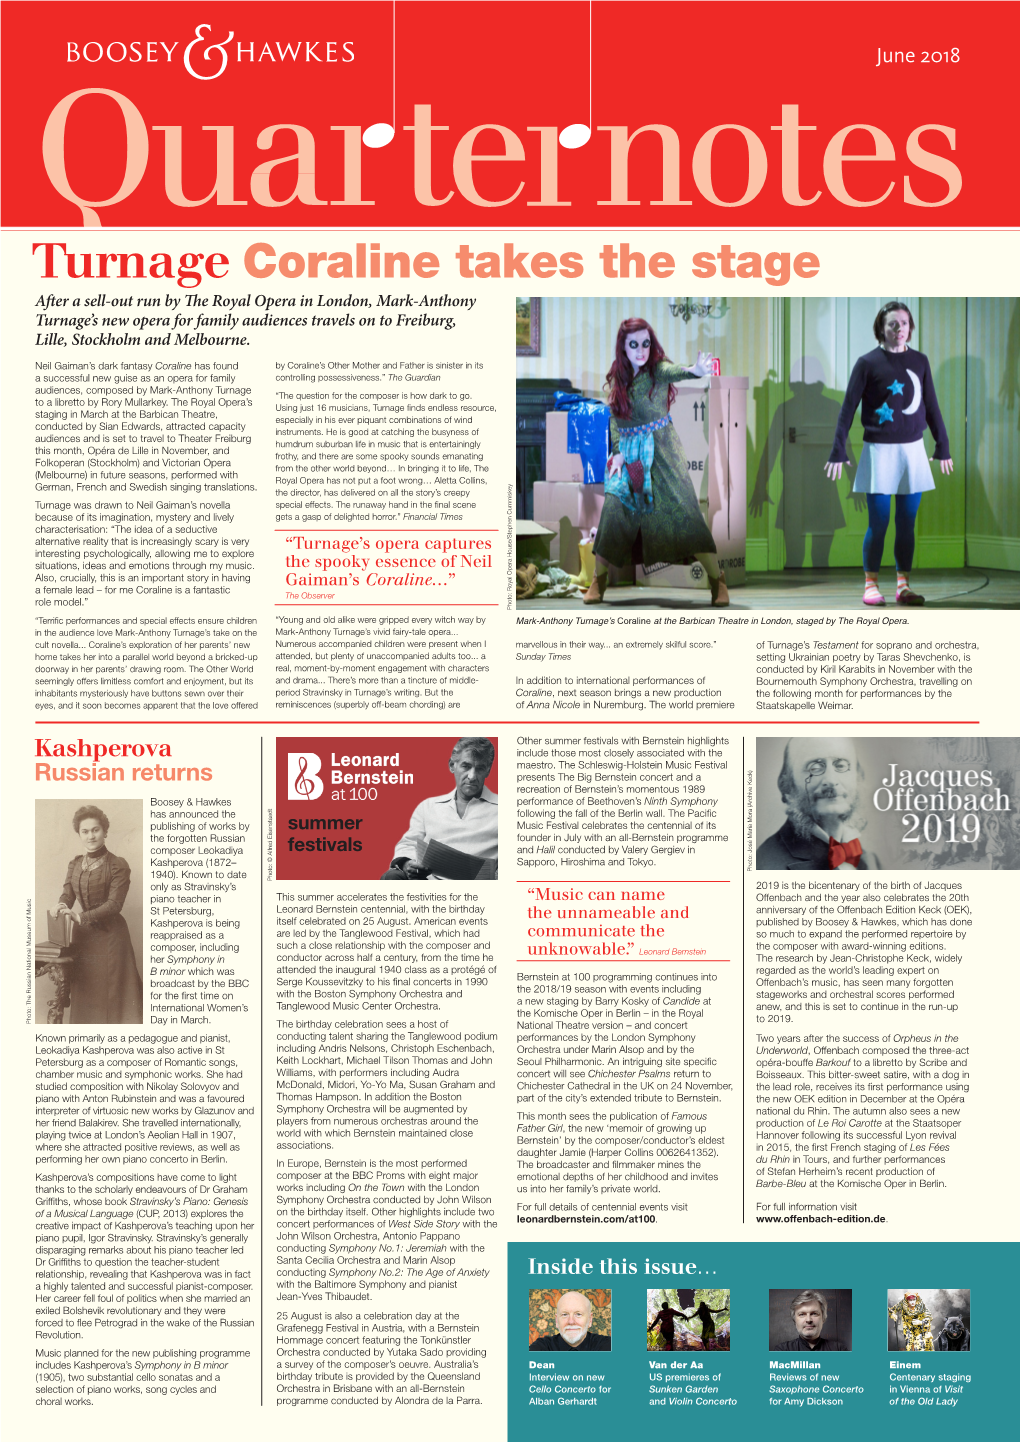 Turnage Coraline Takes the Stage